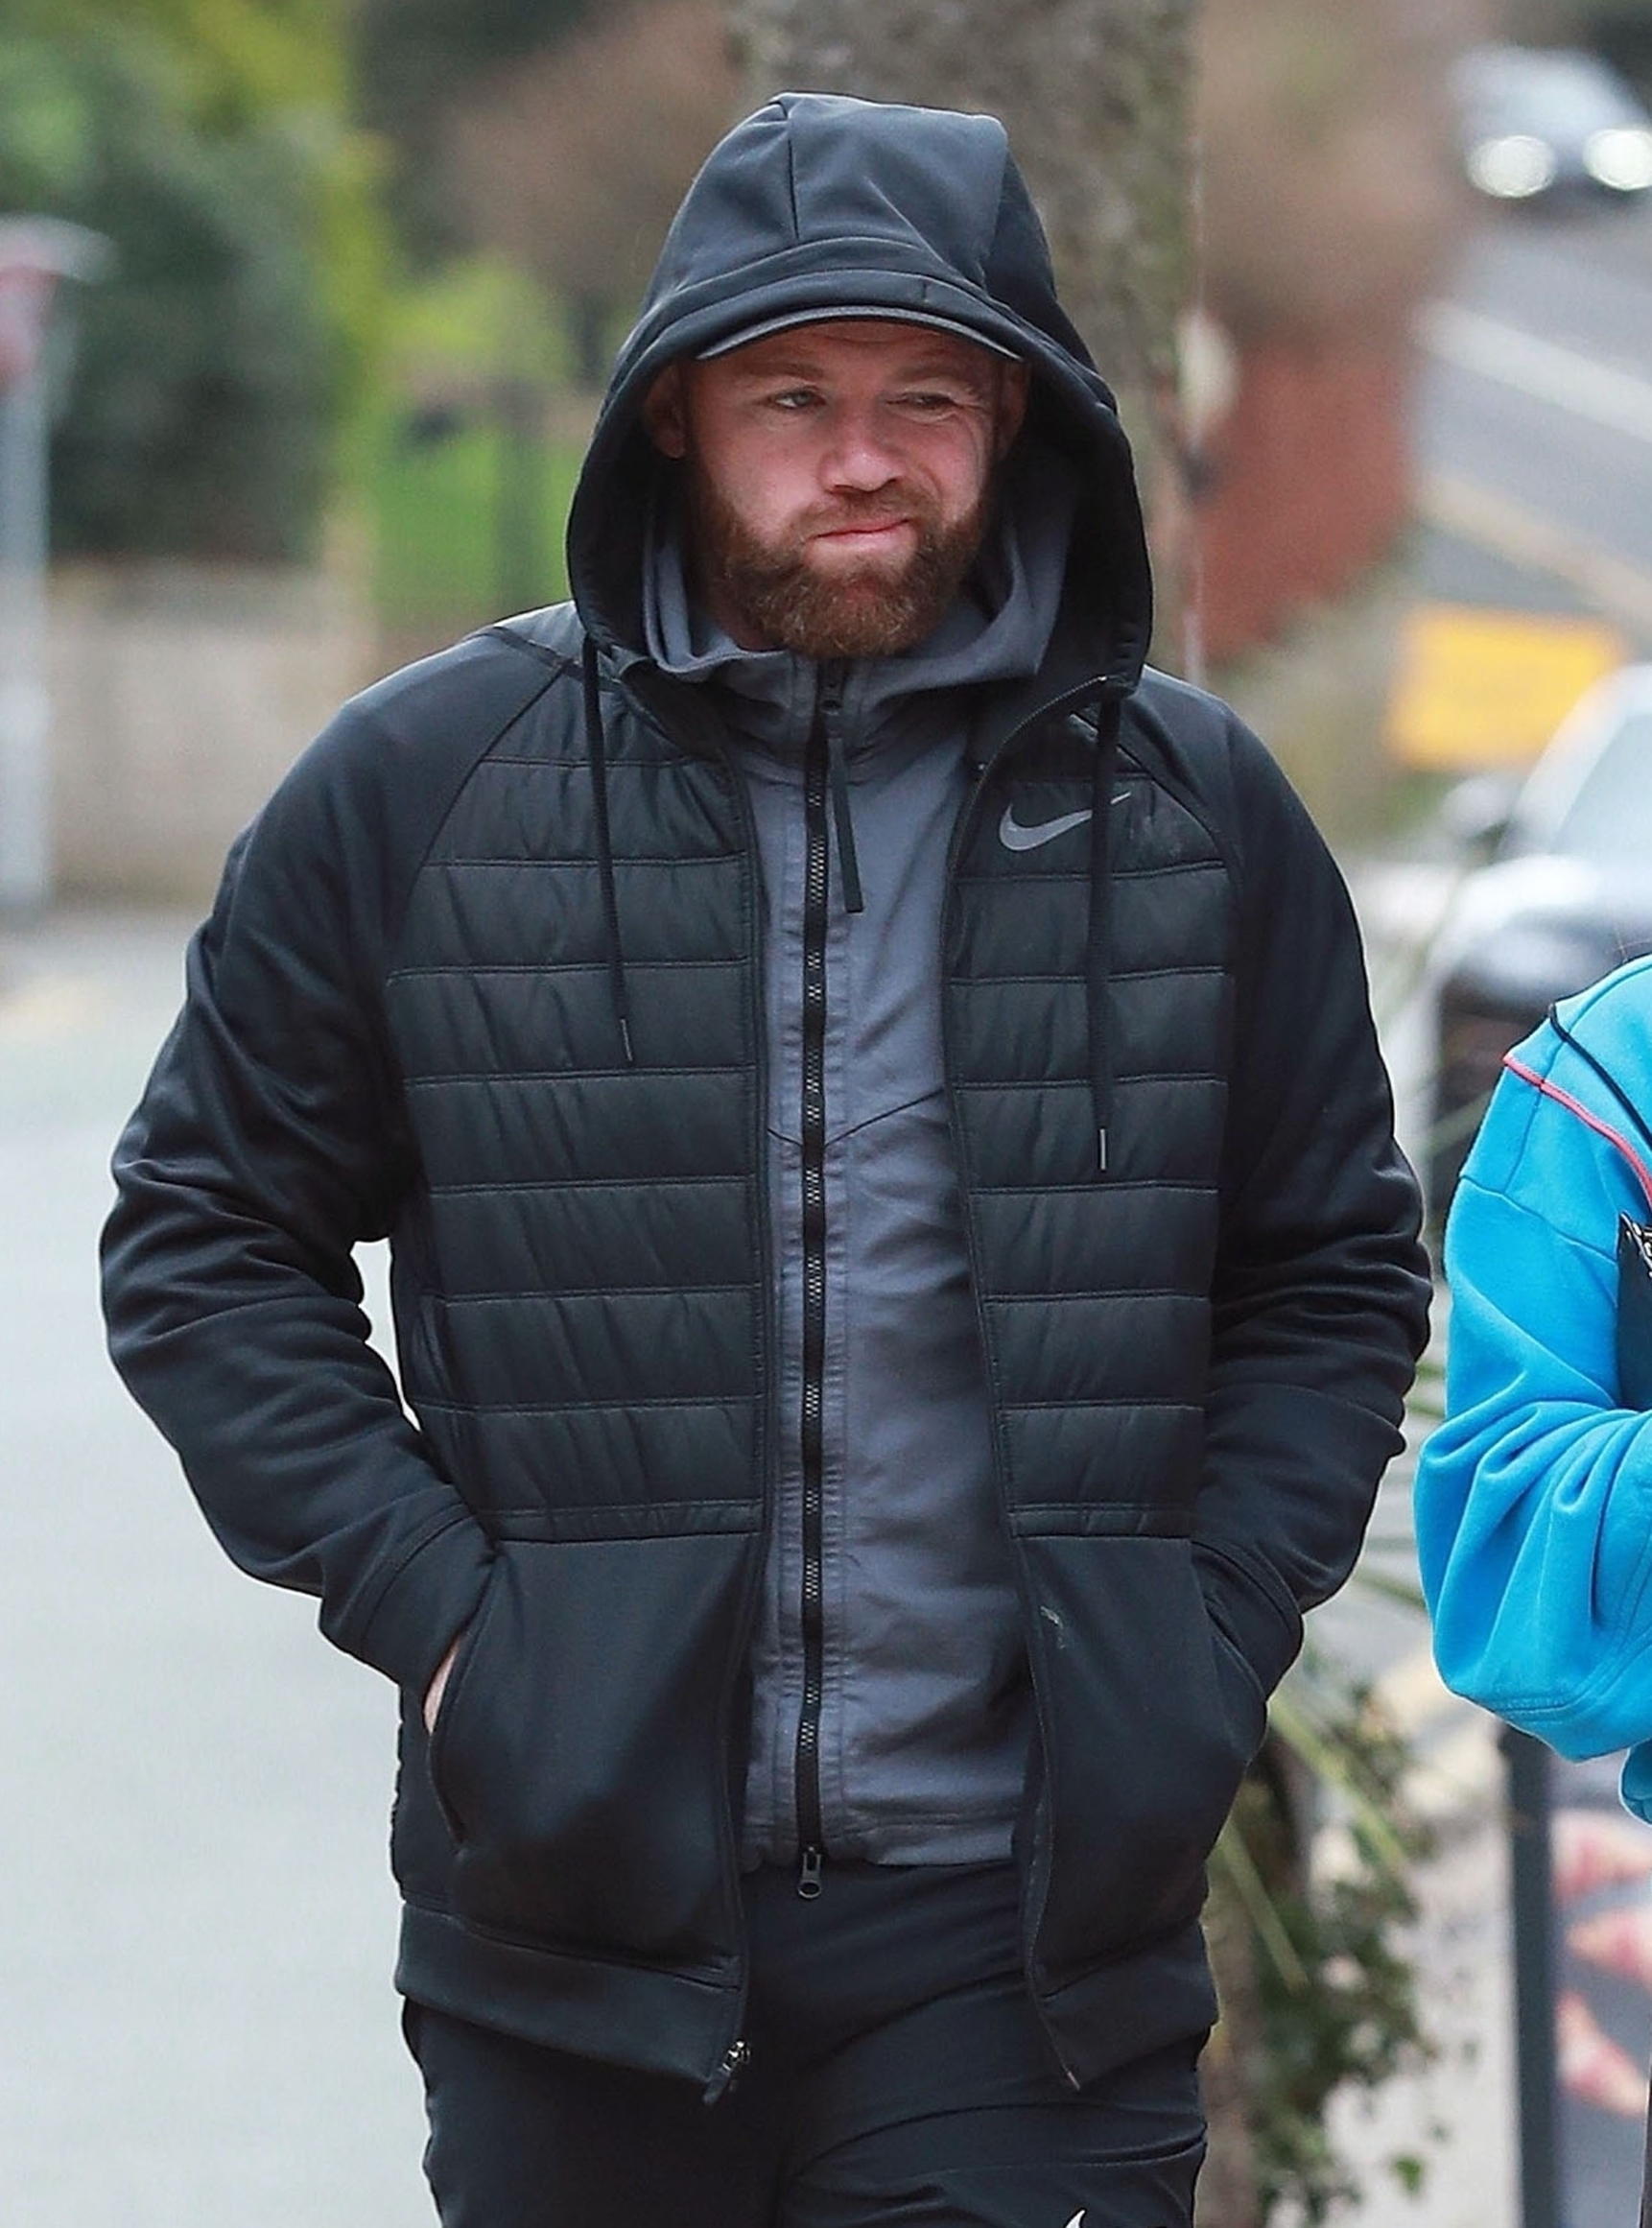 Cheshire, UNITED KINGDOM  - *EXCLUSIVE*  - **STRICTLY NOT AVAILABLE FOR MAIL ONLINE**

Former England International Footballer Wayne Rooney who now applies his trade at the Championship side Derby County is spotted out with his wife Coleen taking a stroll around Alderley Edge. 

Coleen looked sporty in her gym gear wearing black leggings and a blue hooded top holding a bottle of water in hand as a bearded Wayne wore a black hooded Nike jacket.

BACKGRID UK 17 FEBRUARY 2020, Image: 499058734, License: Rights-managed, Restrictions: , Model Release: no, Credit line: Stephen Crawshaw / BACKGRID / Backgrid UK / Profimedia